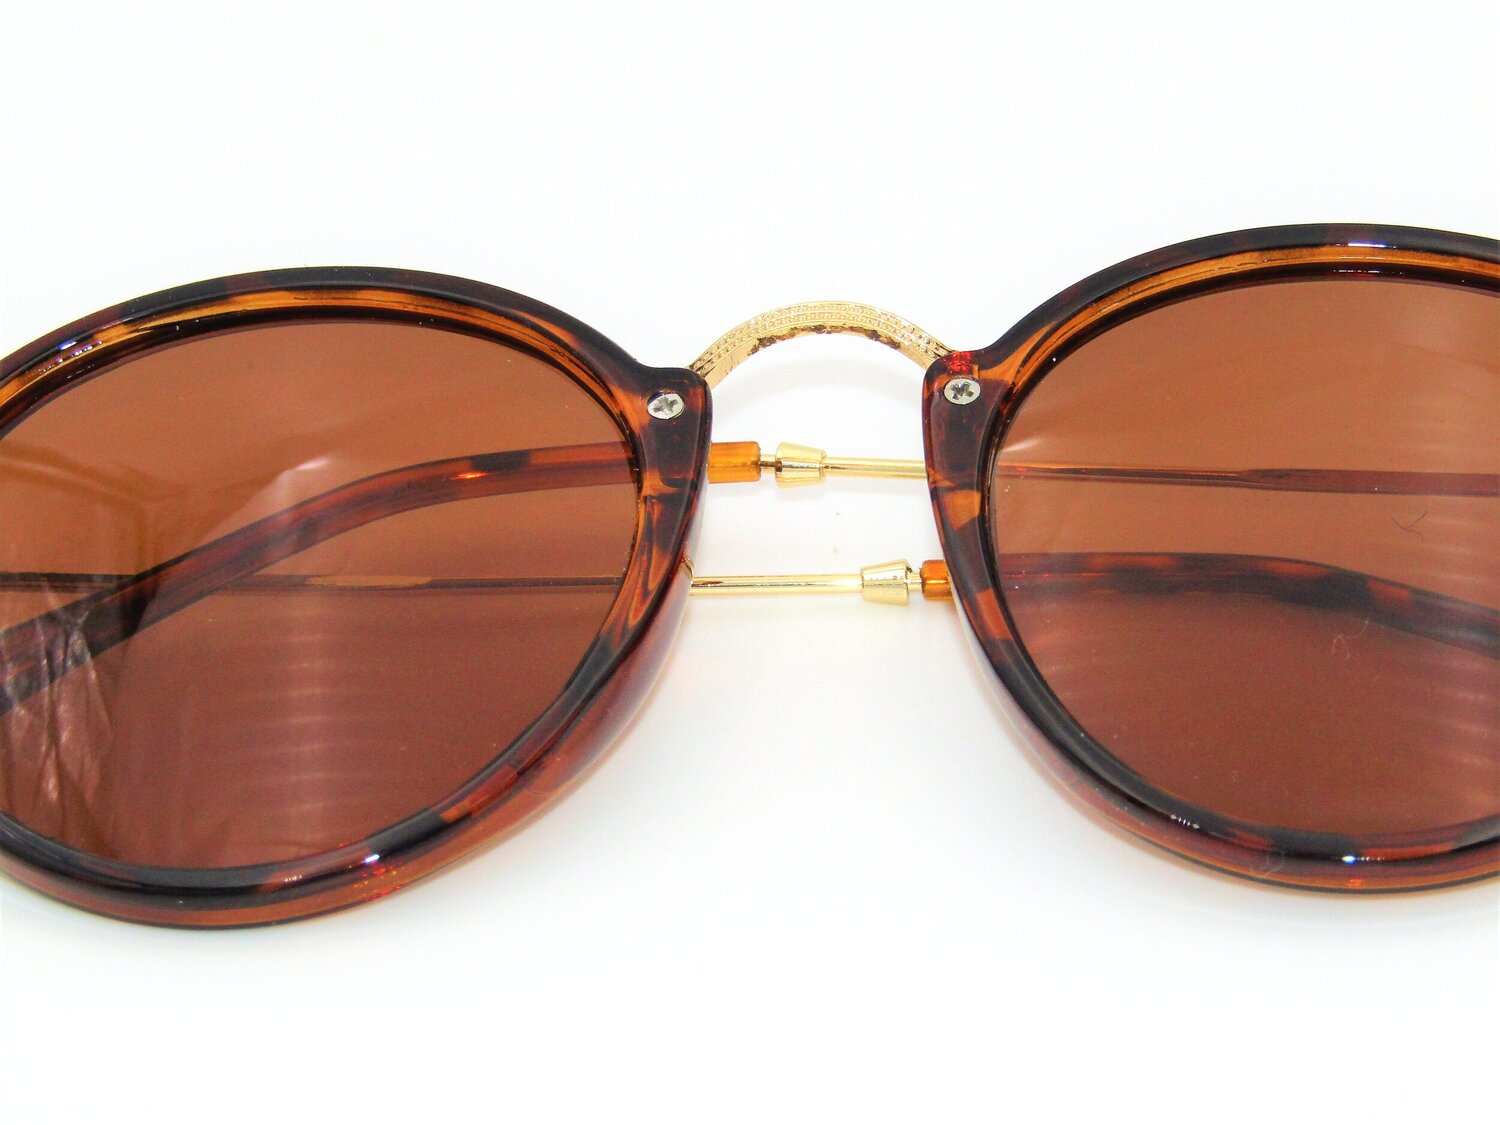 Shop WEEKDAY Square 70s Vintage-Inspired Sunglasses | Giant Vintage  Sunglasses